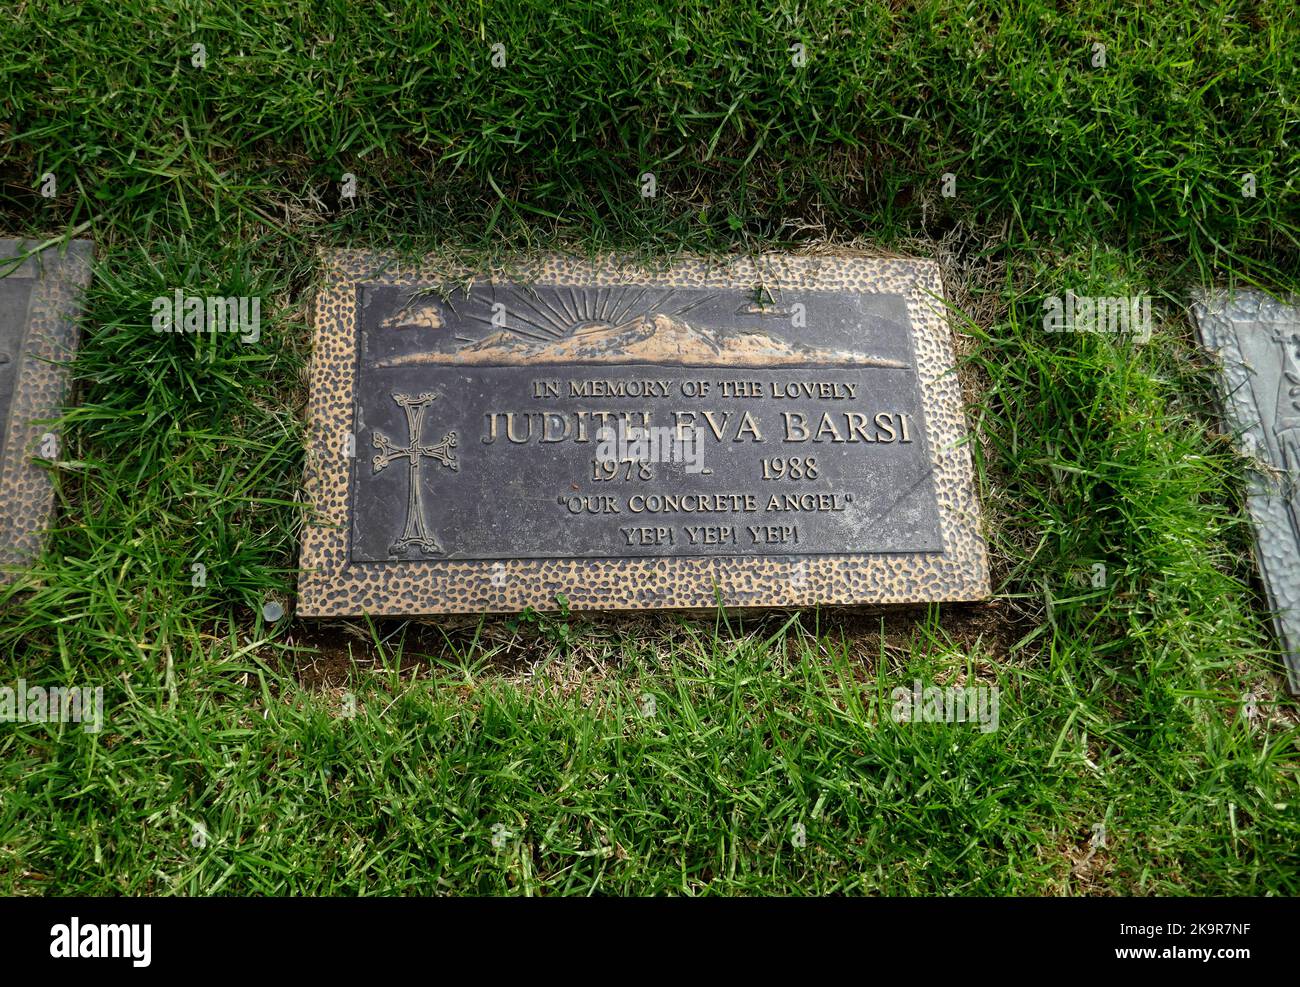 Los Angeles, California, USA 28th October 2022 Actress Judith Barsi's Grave at Forest Lawn Memorial Park Hollywood Hills on October 28, 2022 in Los Angeles, California, USA. Photo by Barry King/Alamy Stock Photo Stock Photo